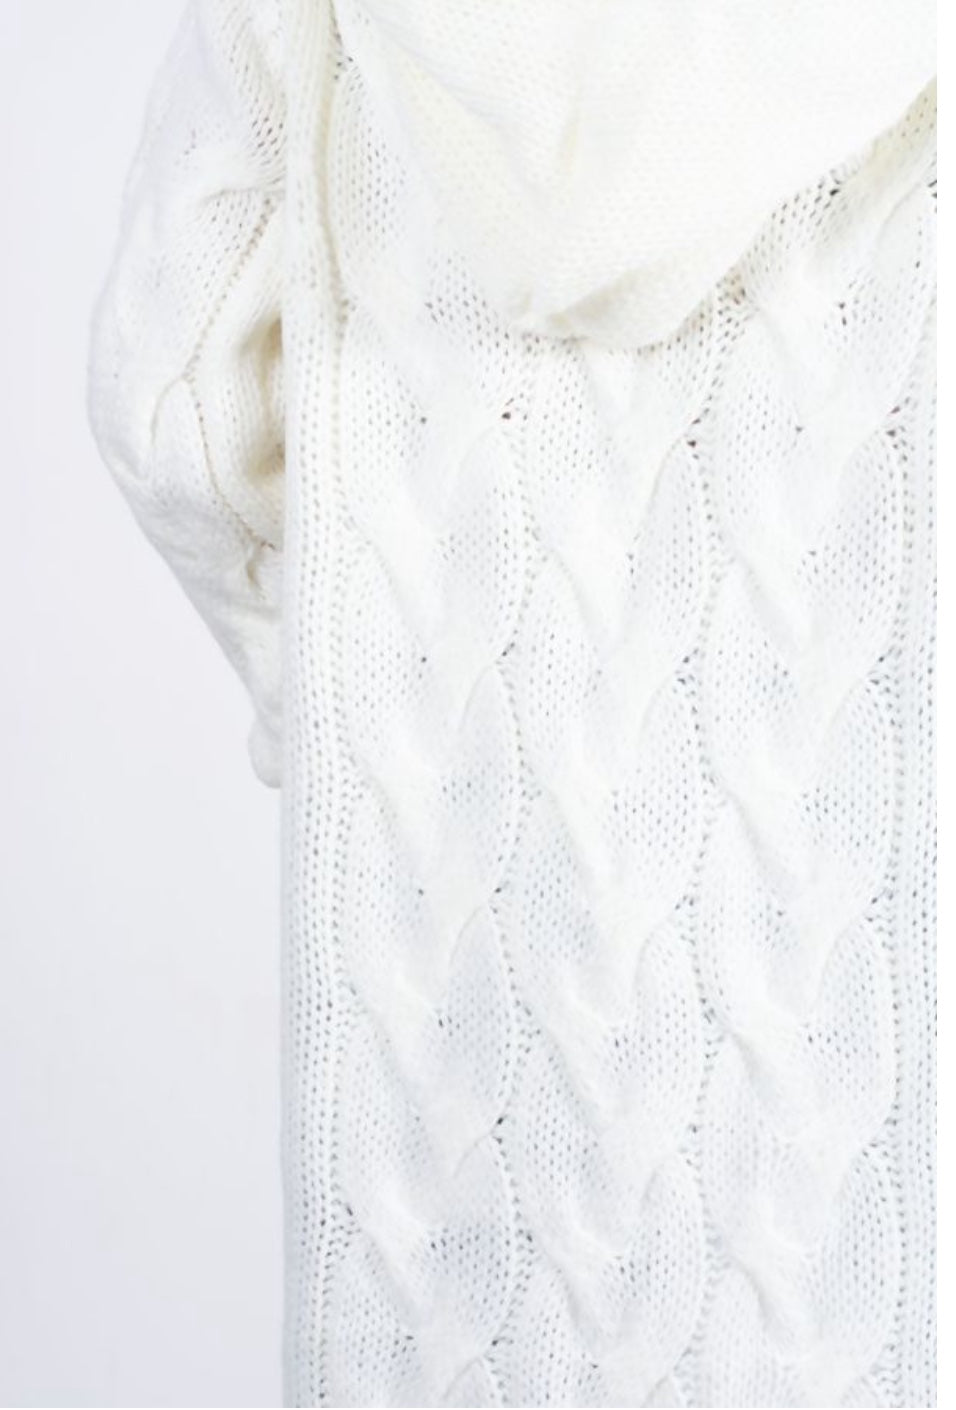 Cara Cream Winter White Chunky Cable Knit Long Hooded Cardigan